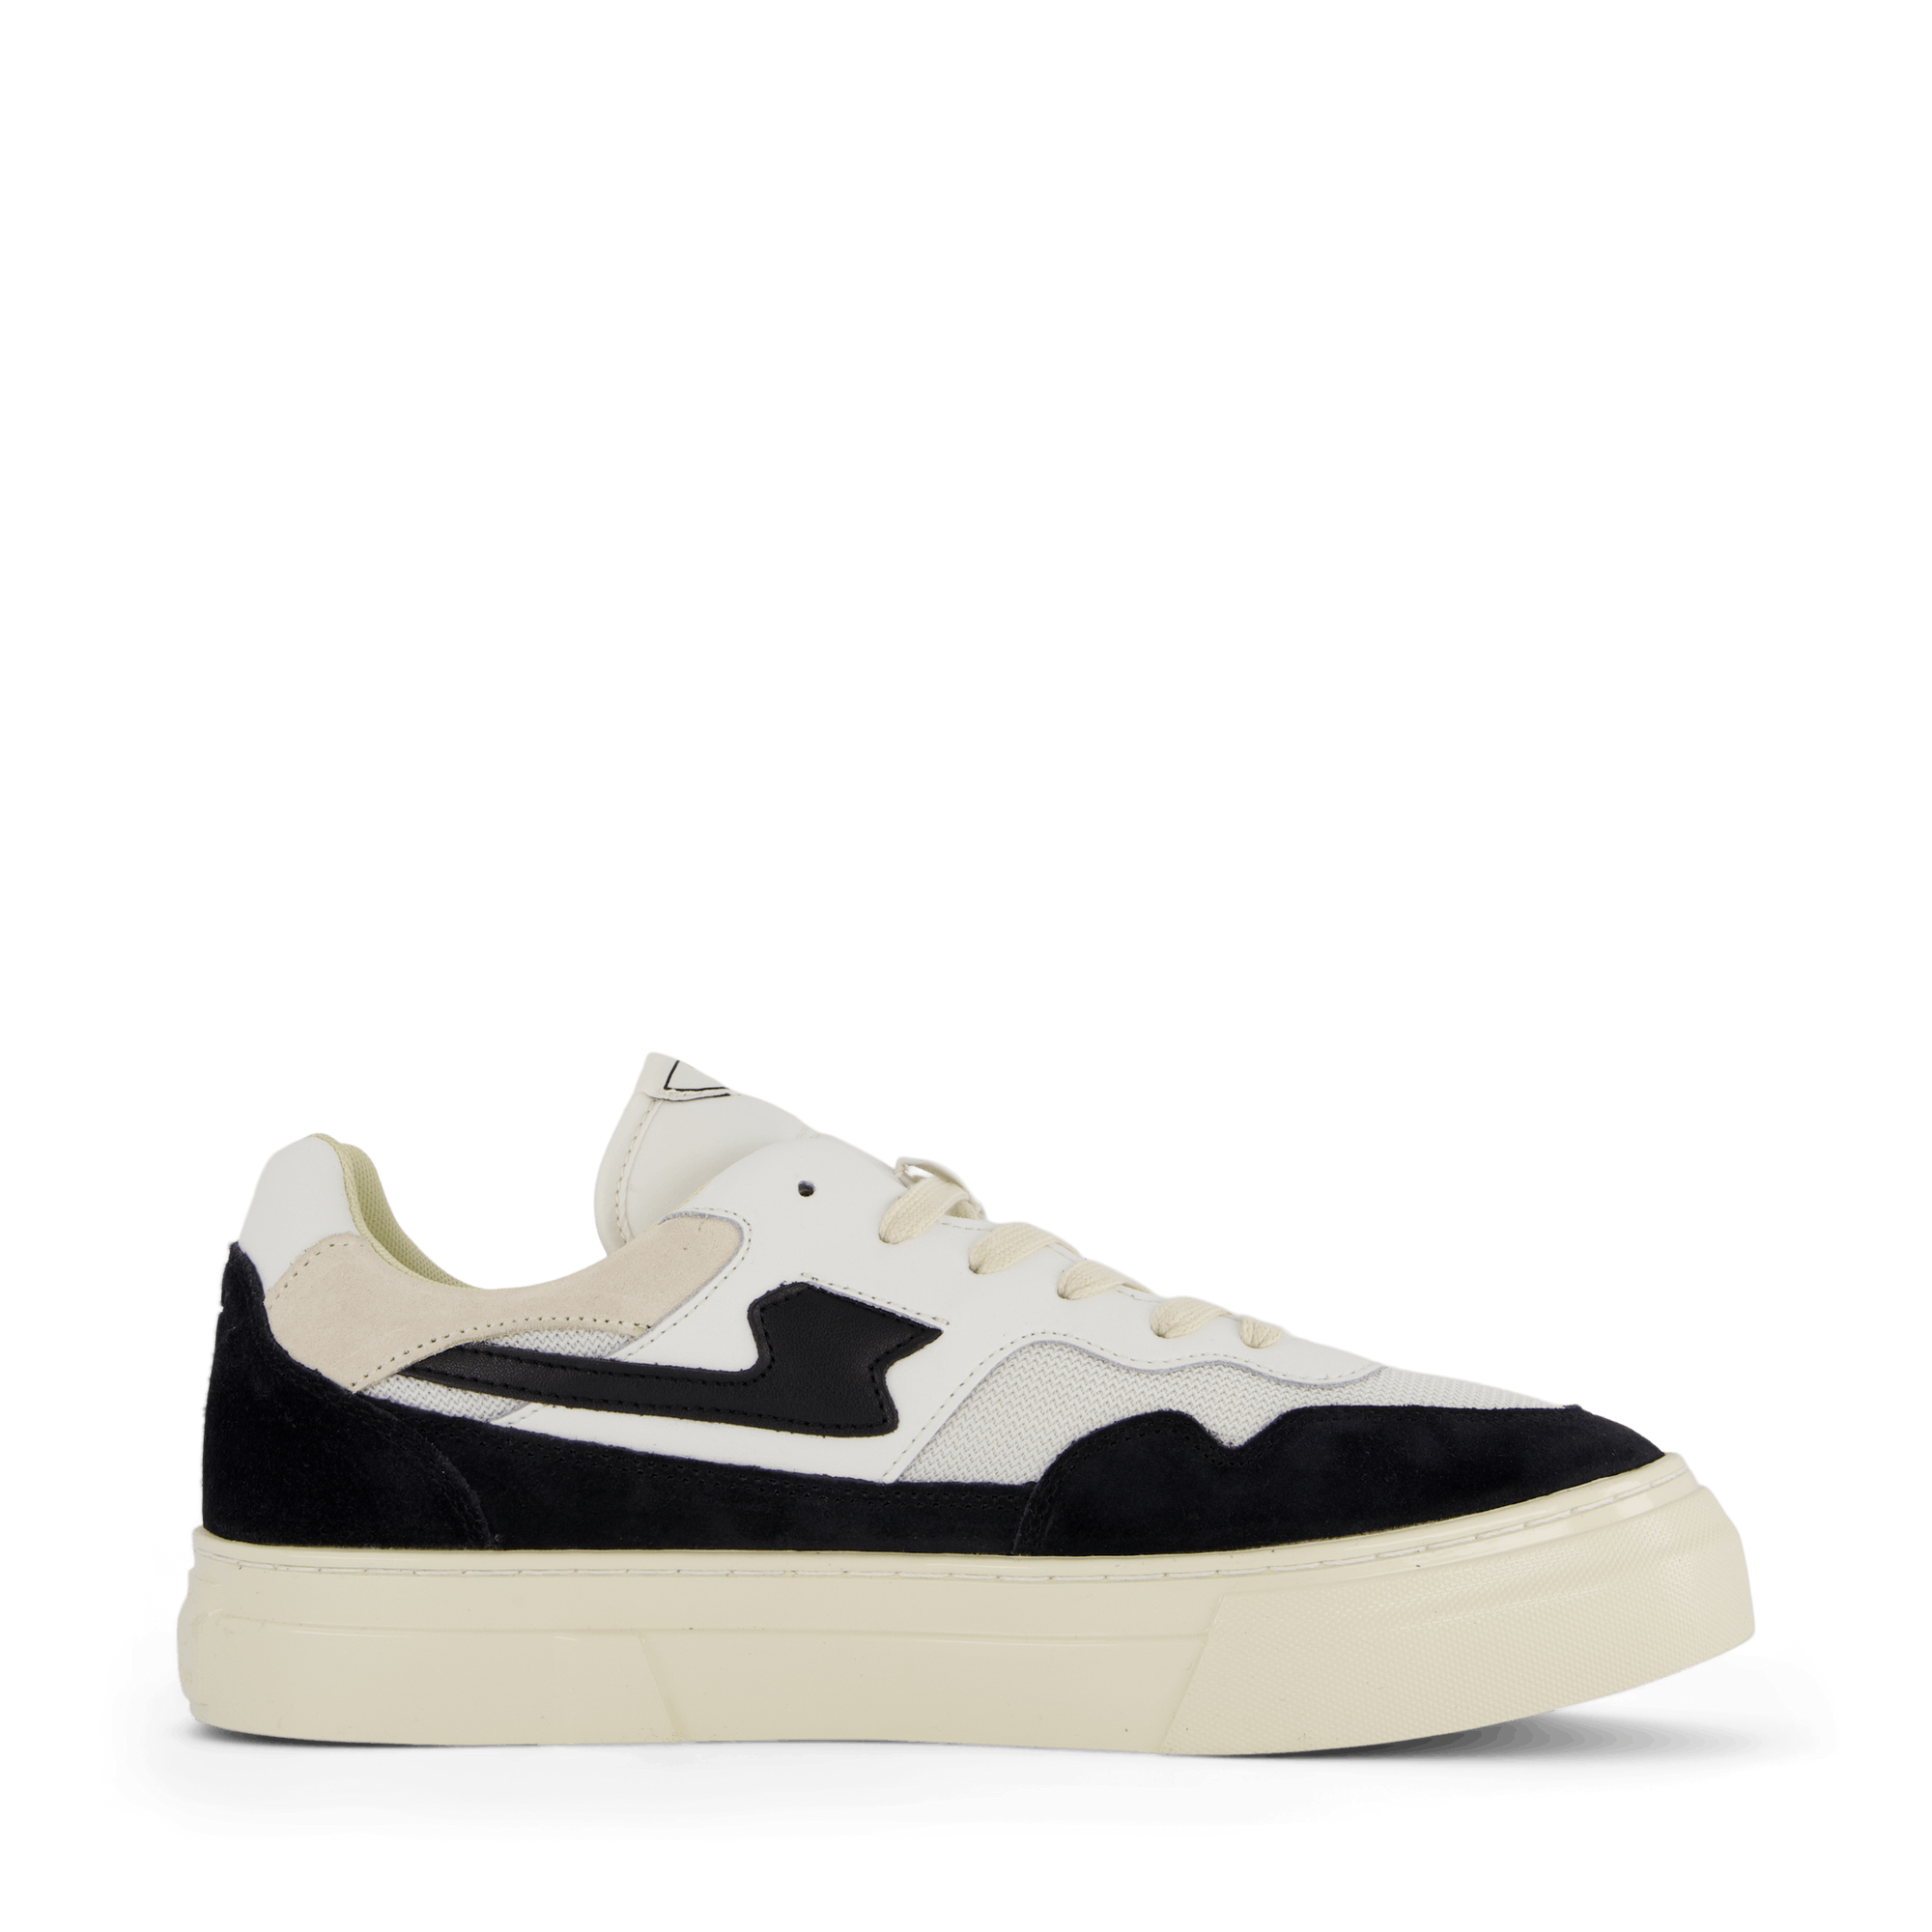 Pearl S-strike Suede Mix Wht/blk